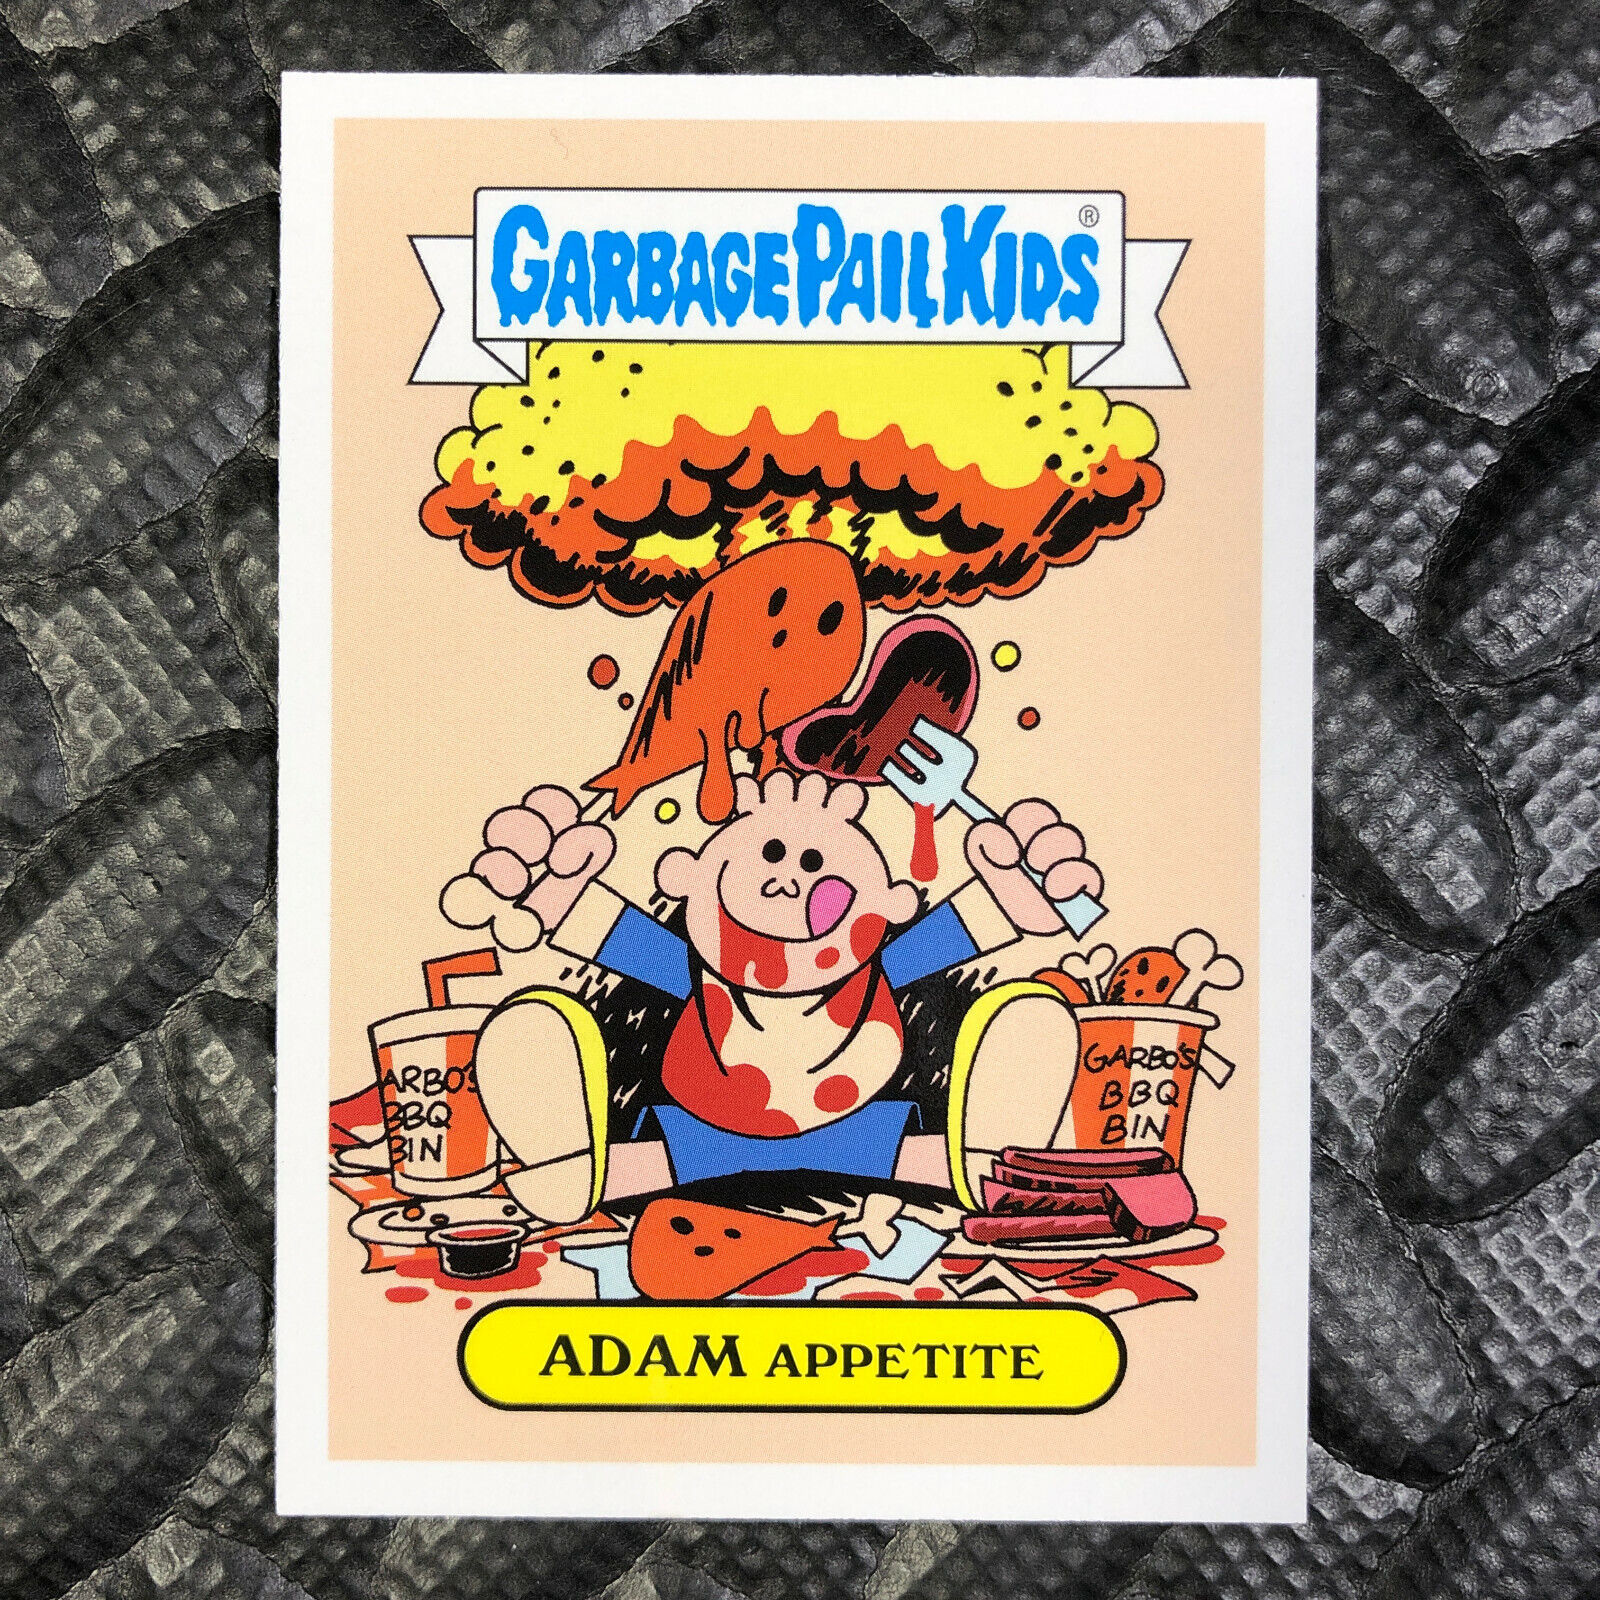 NEW GARBAGE PAIL KIDS FOOD FIGHT ADAM APPETITE DIGITAL PACK REDEMPTION CARD bomb